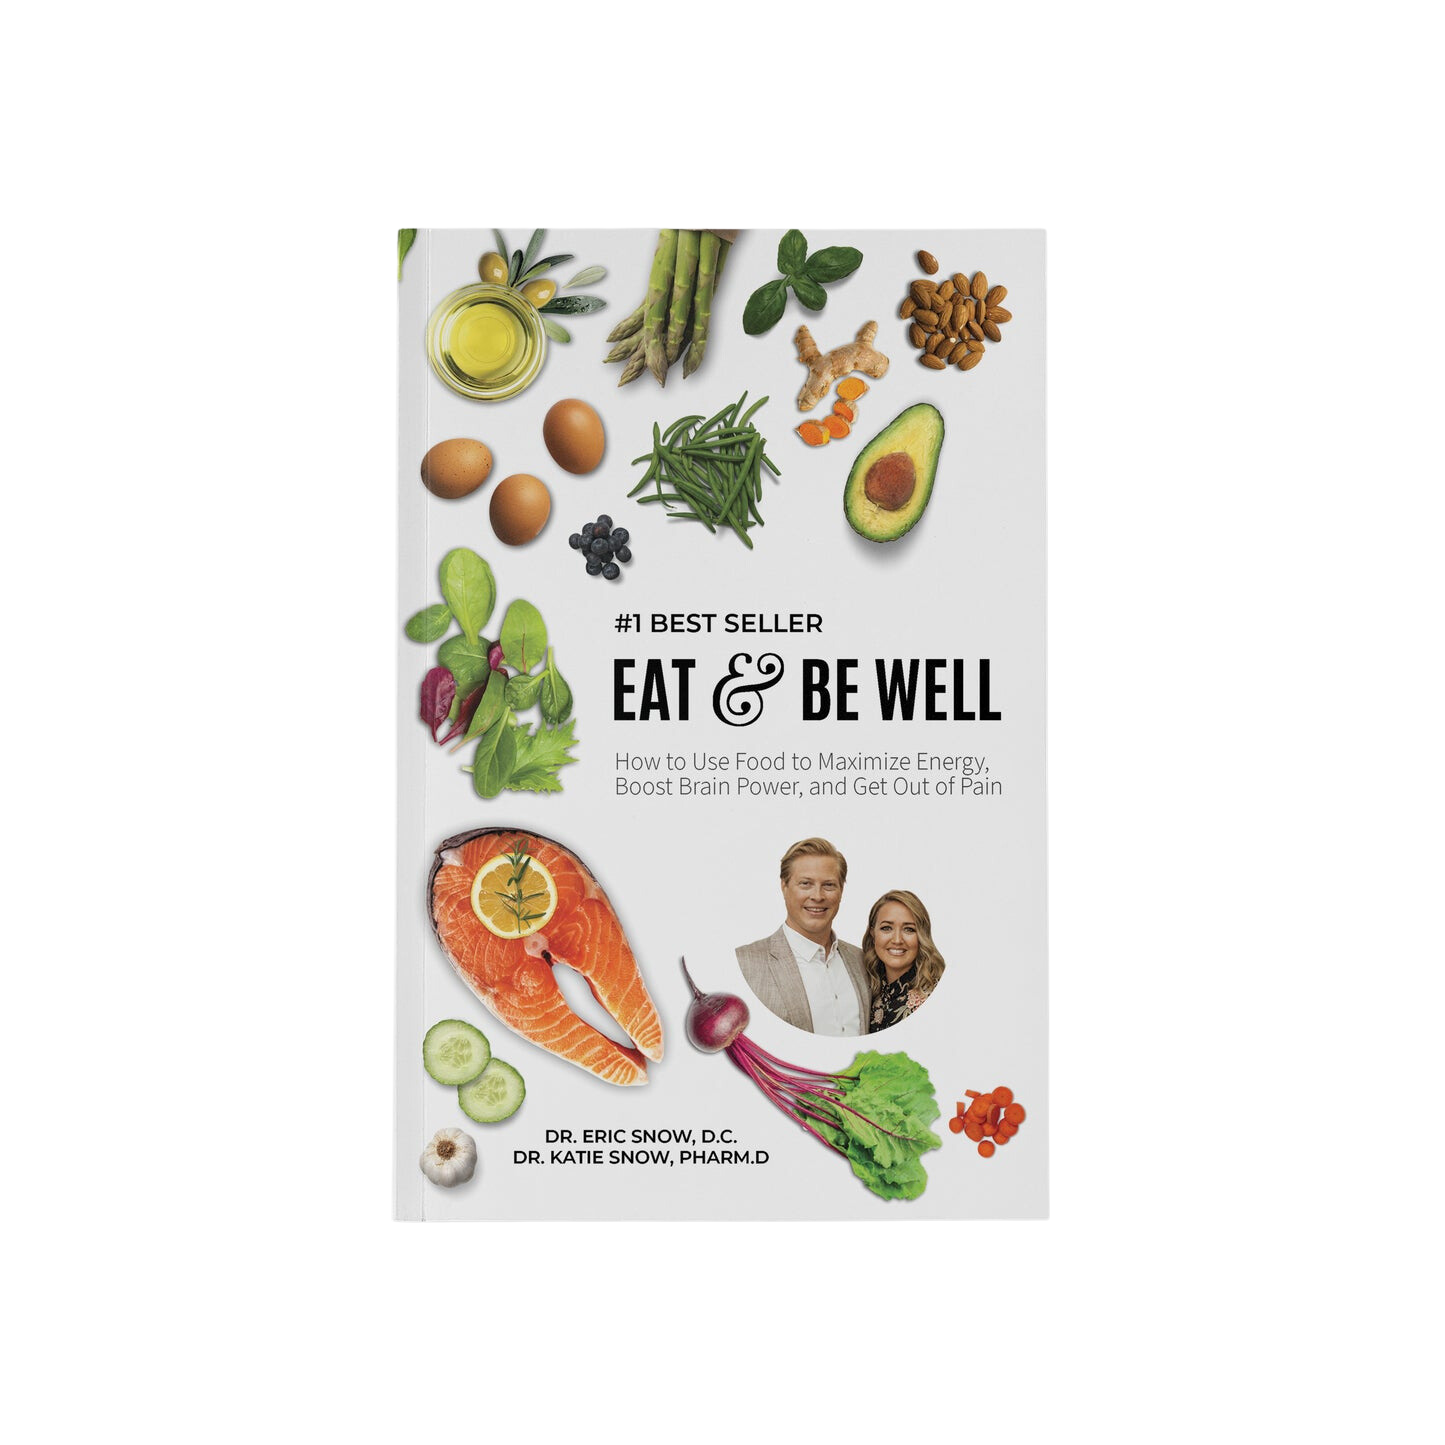 Eat & Be Well: How To Use Food To Maximize Energy, Boost Brain Power, And Get Out Of Pain